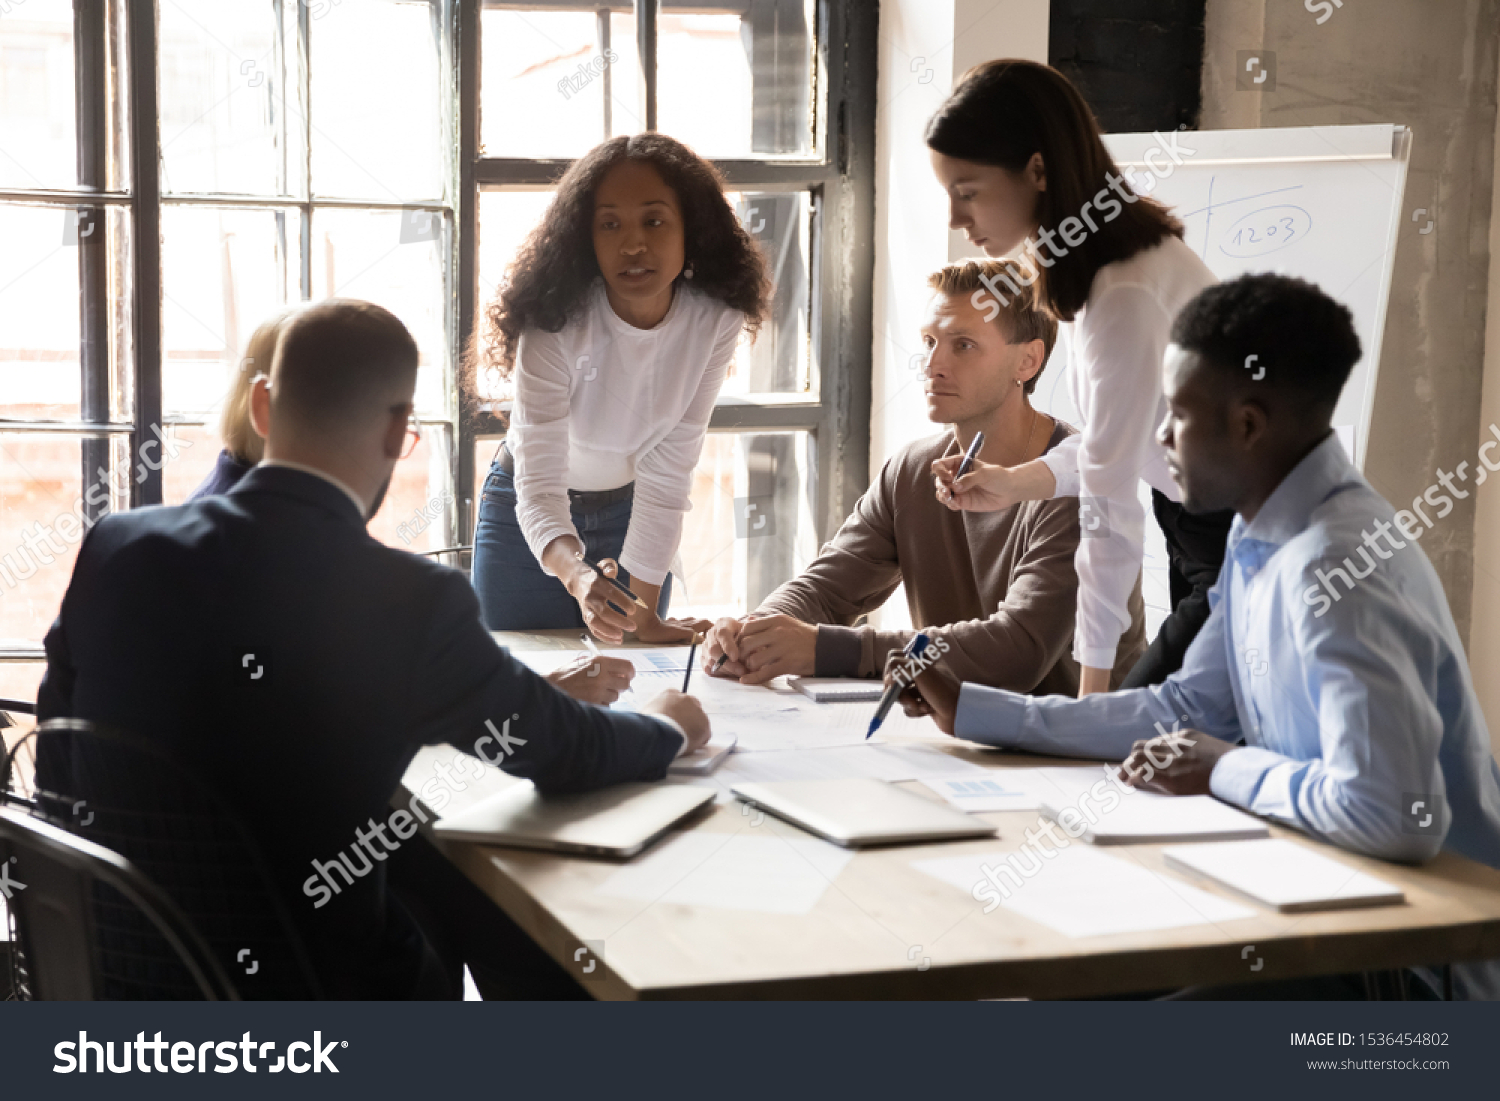 Serious international diverse business team people and african female leader boss discuss financial result review paperwork share ideas brainstorm collaborate work in teamwork at group briefing table #1536454802